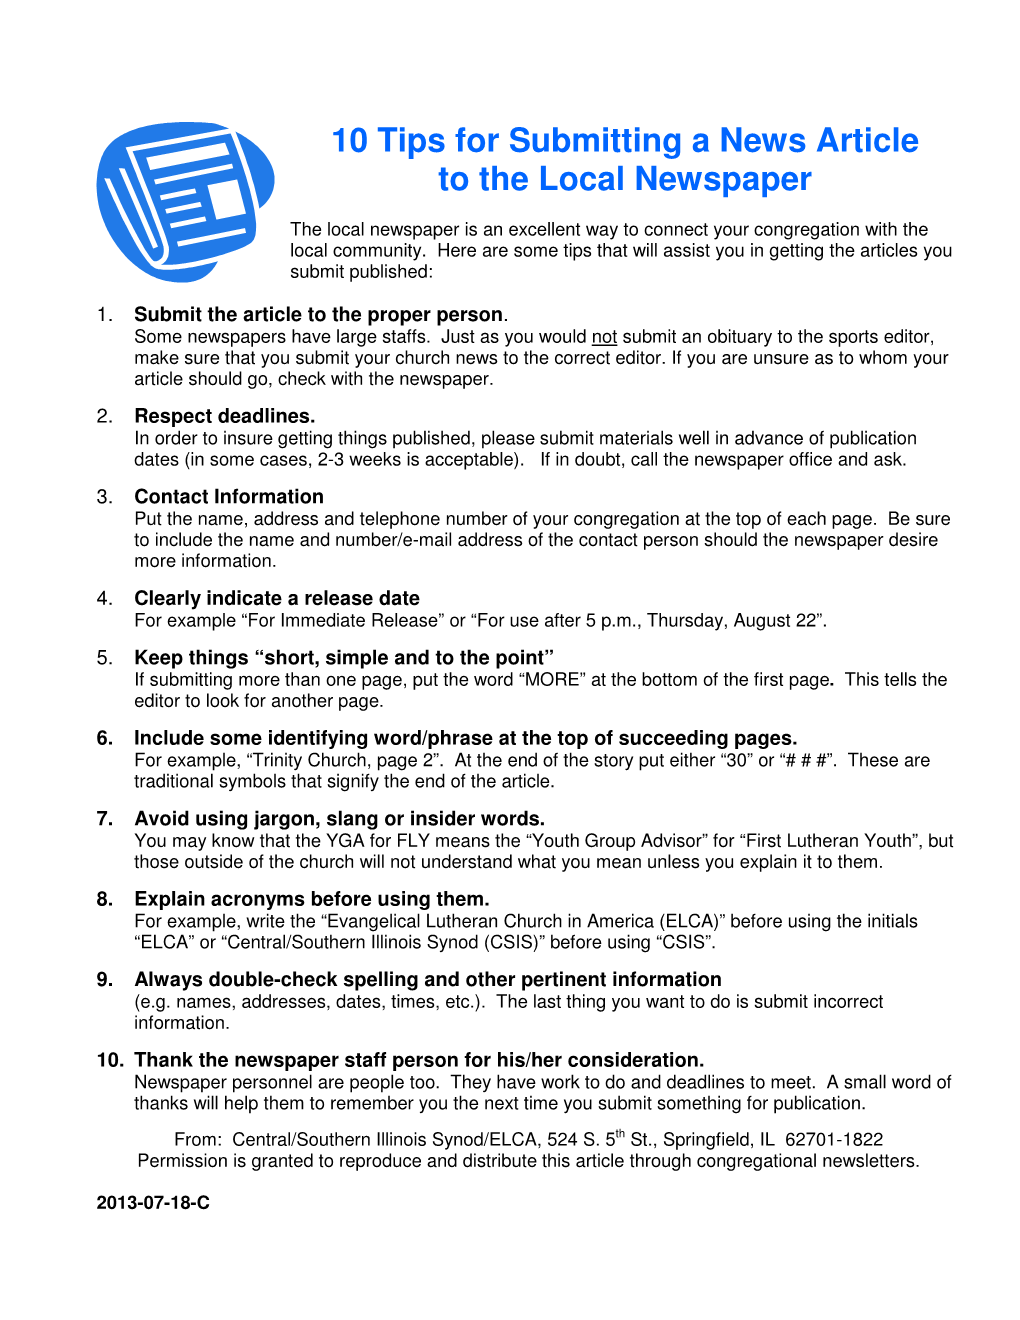 10 Tips for Submitting a News Article to the Local Newspaper